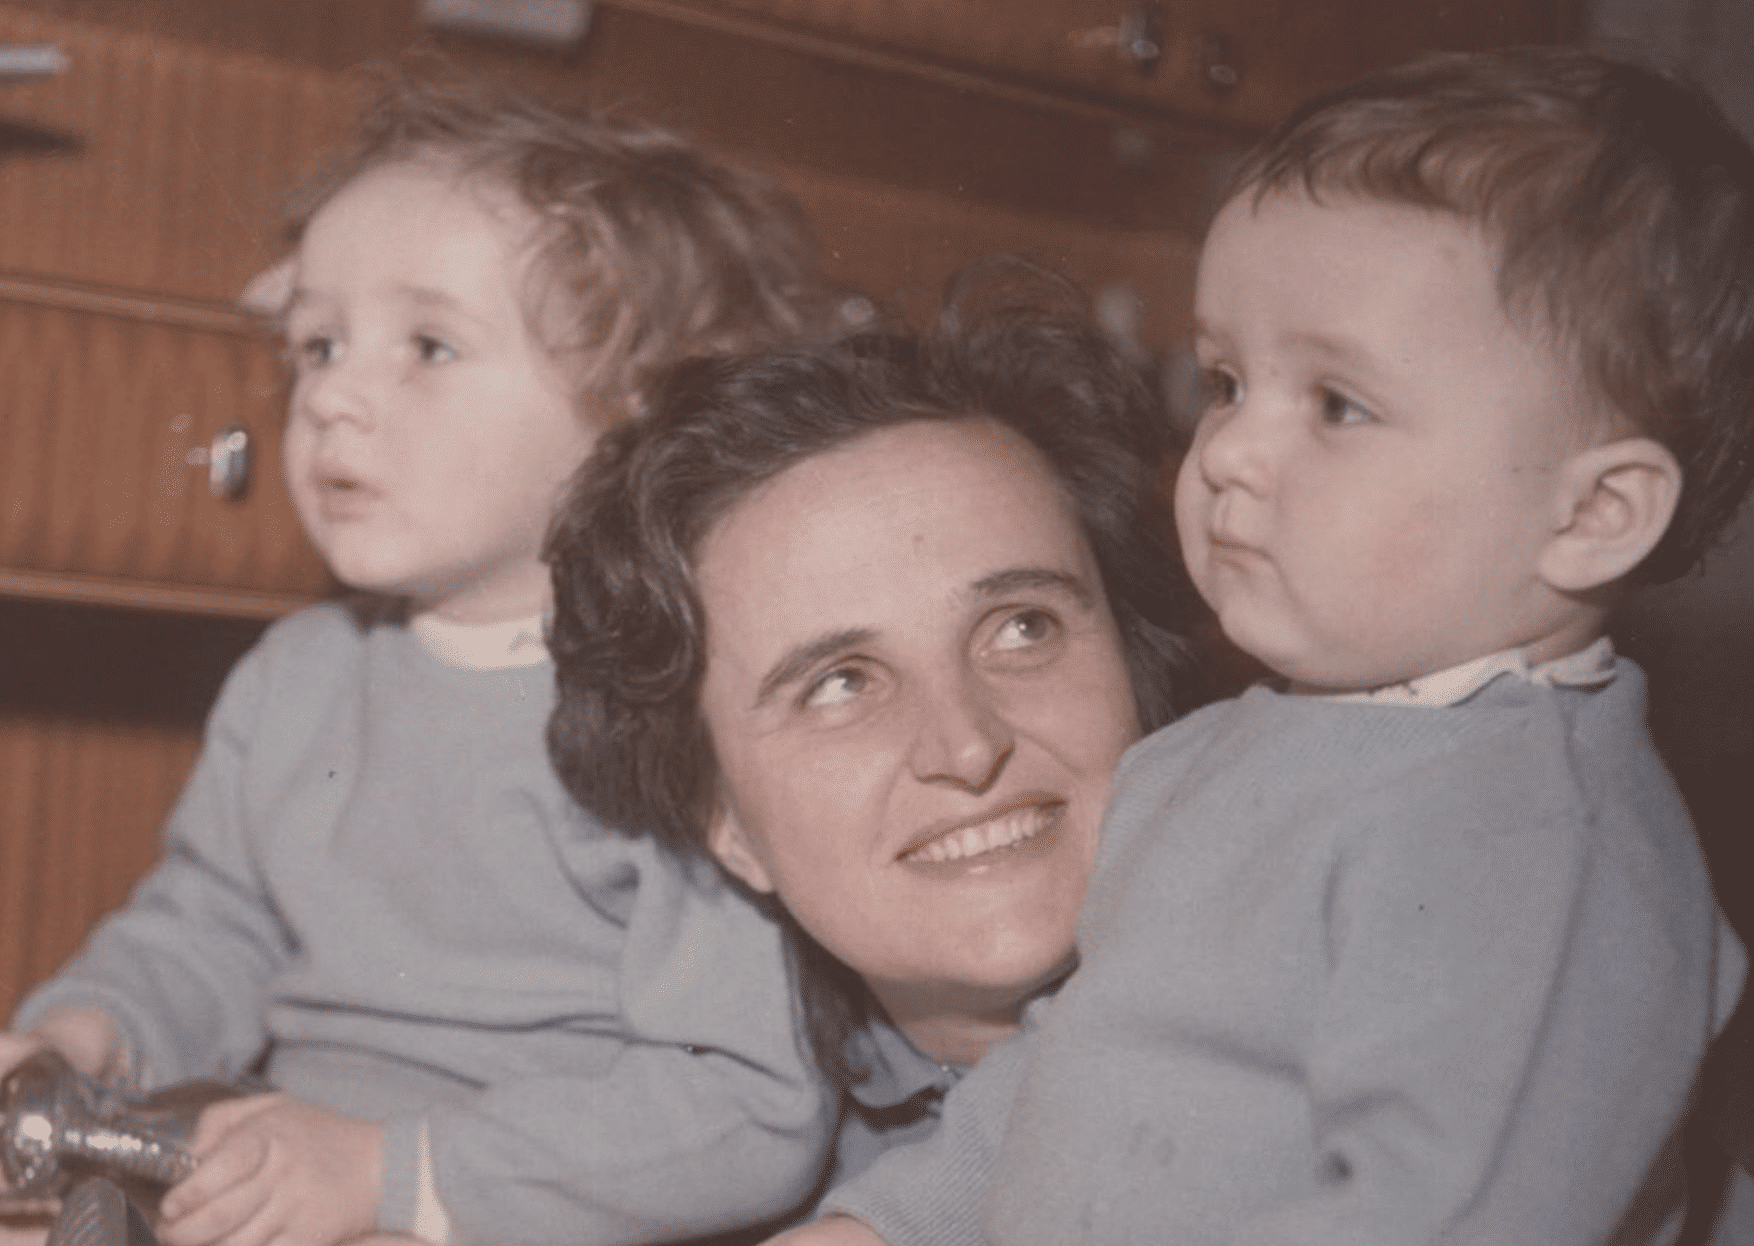 St. Gianna Beretta Molla is seen with her children in this 1959 photo. The Italian doctor and mother, who sacrificed her own life for the life of her child, was canonized by Pope John Paul II in 2004. (CNS photo/courtesy Diocese of Springfield)